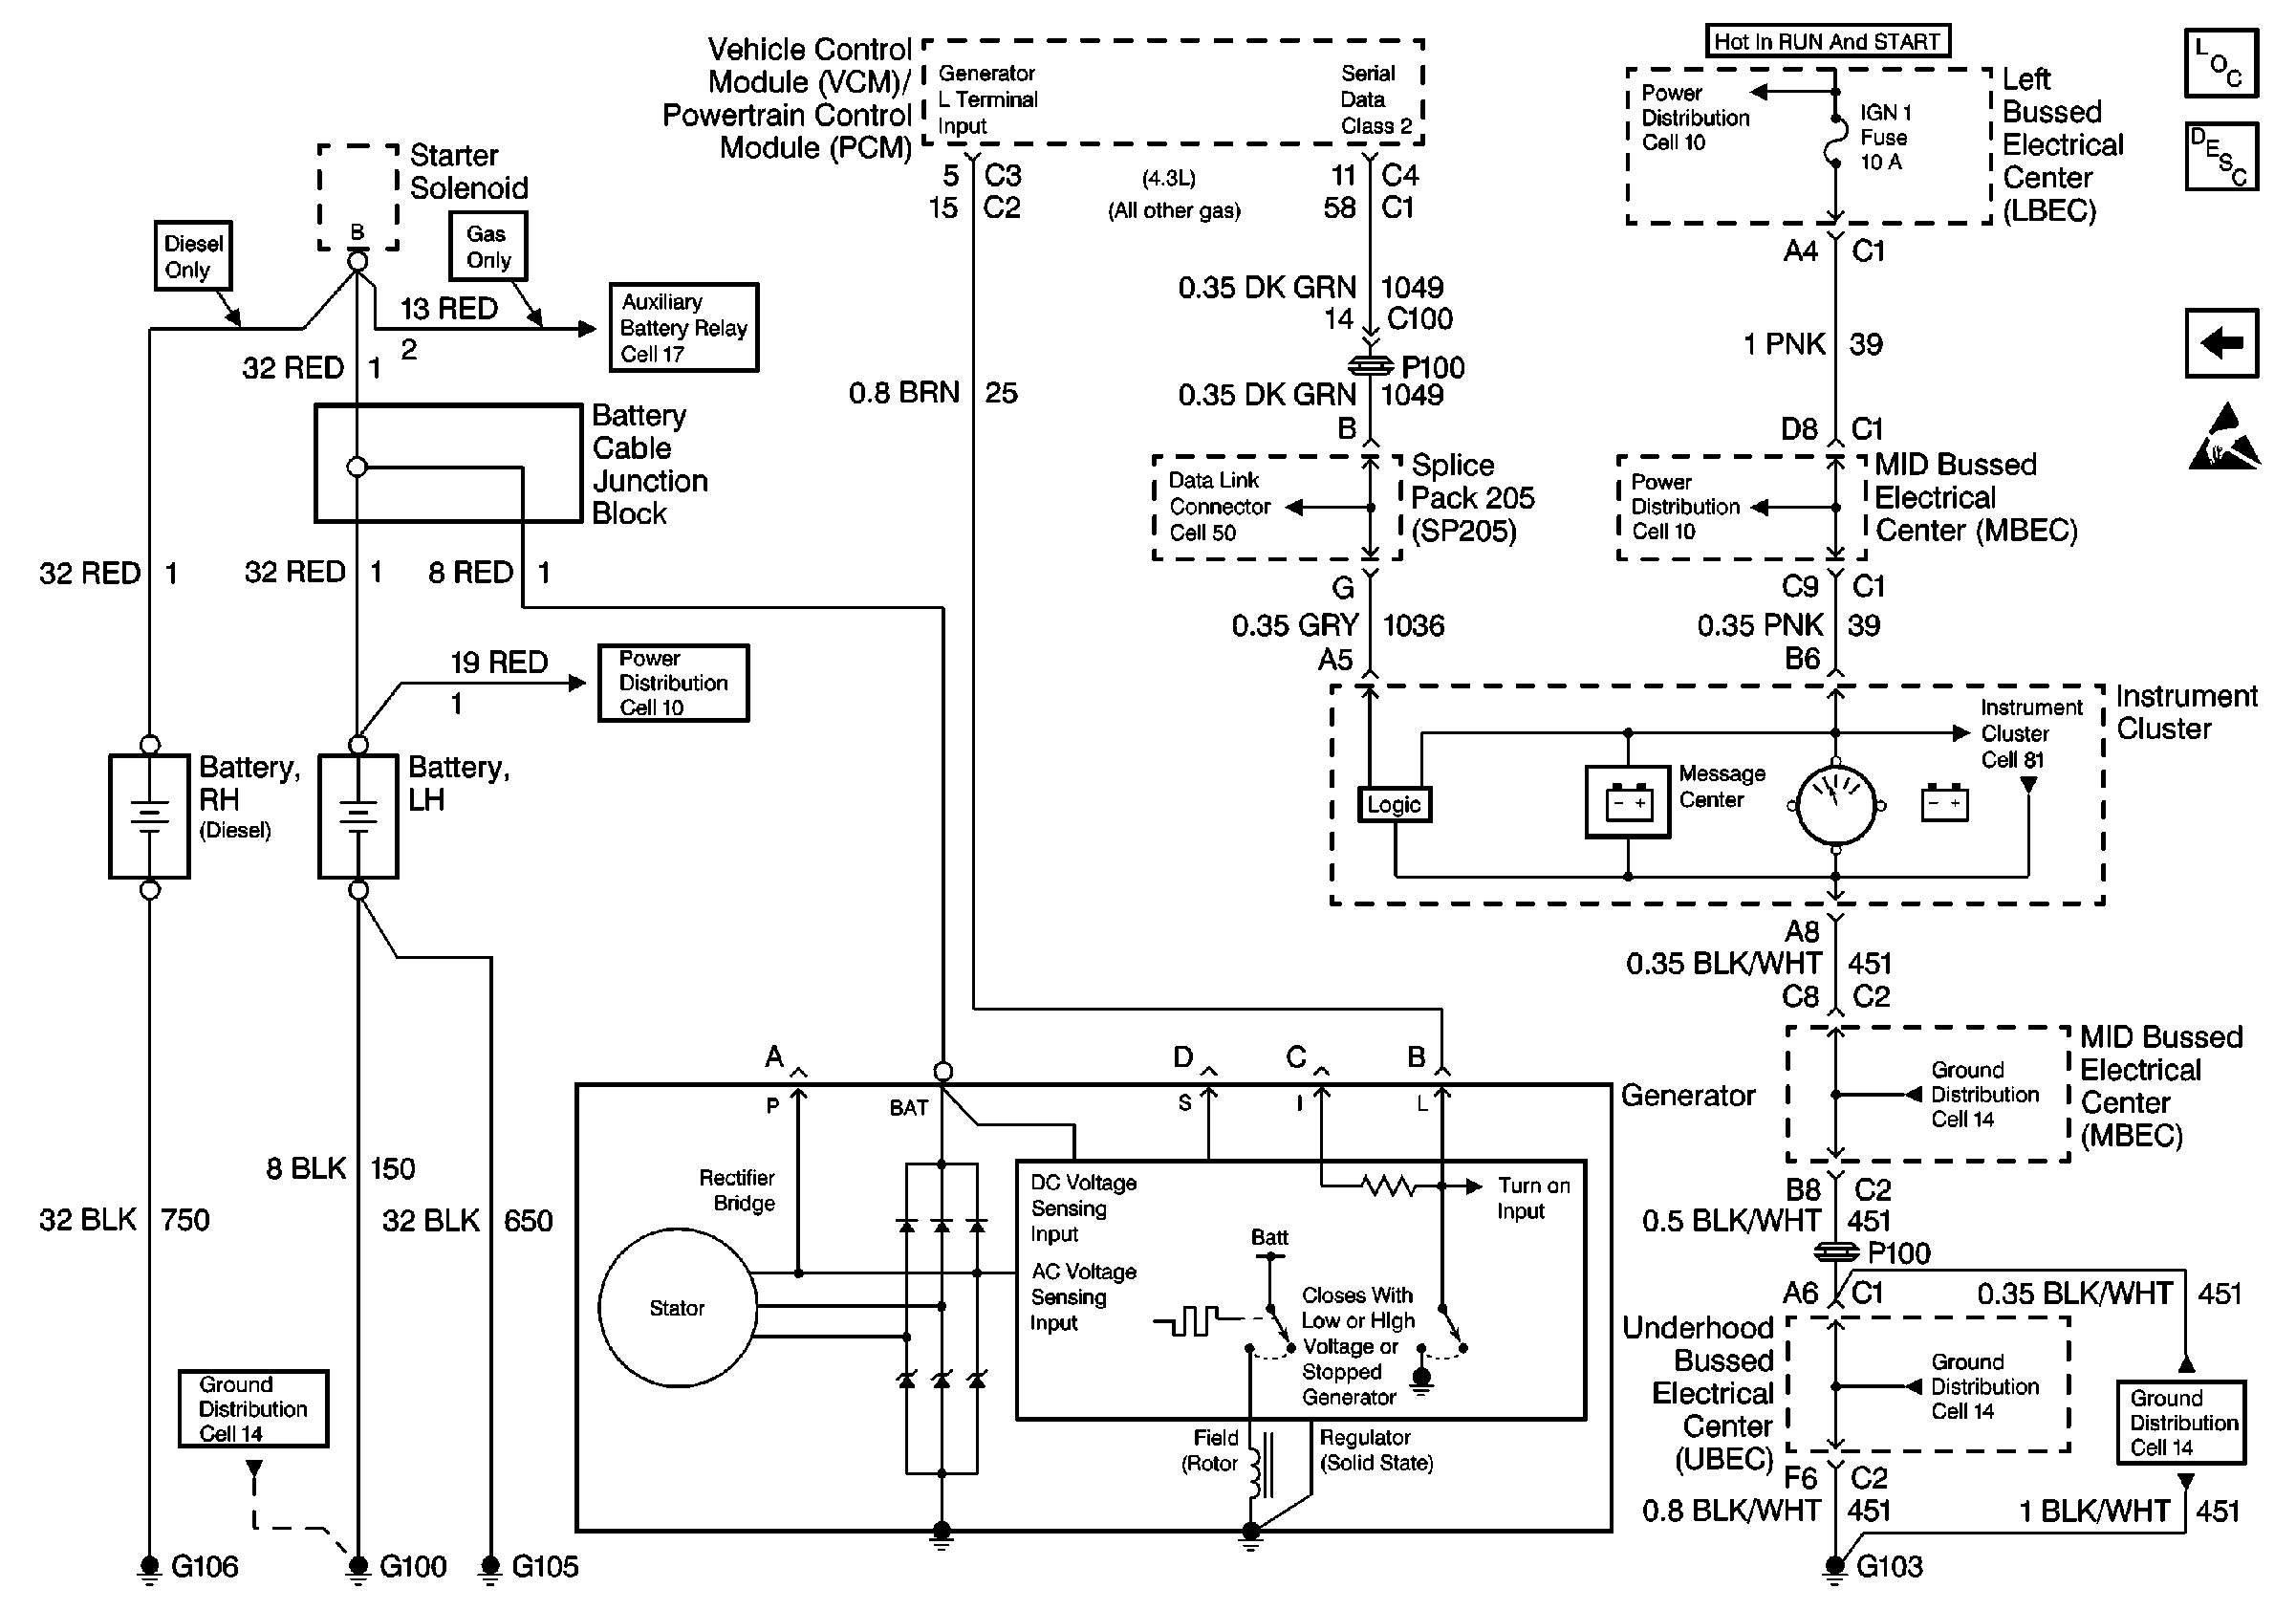 Data Link Connector Wiring Diagram from ls1tech.com